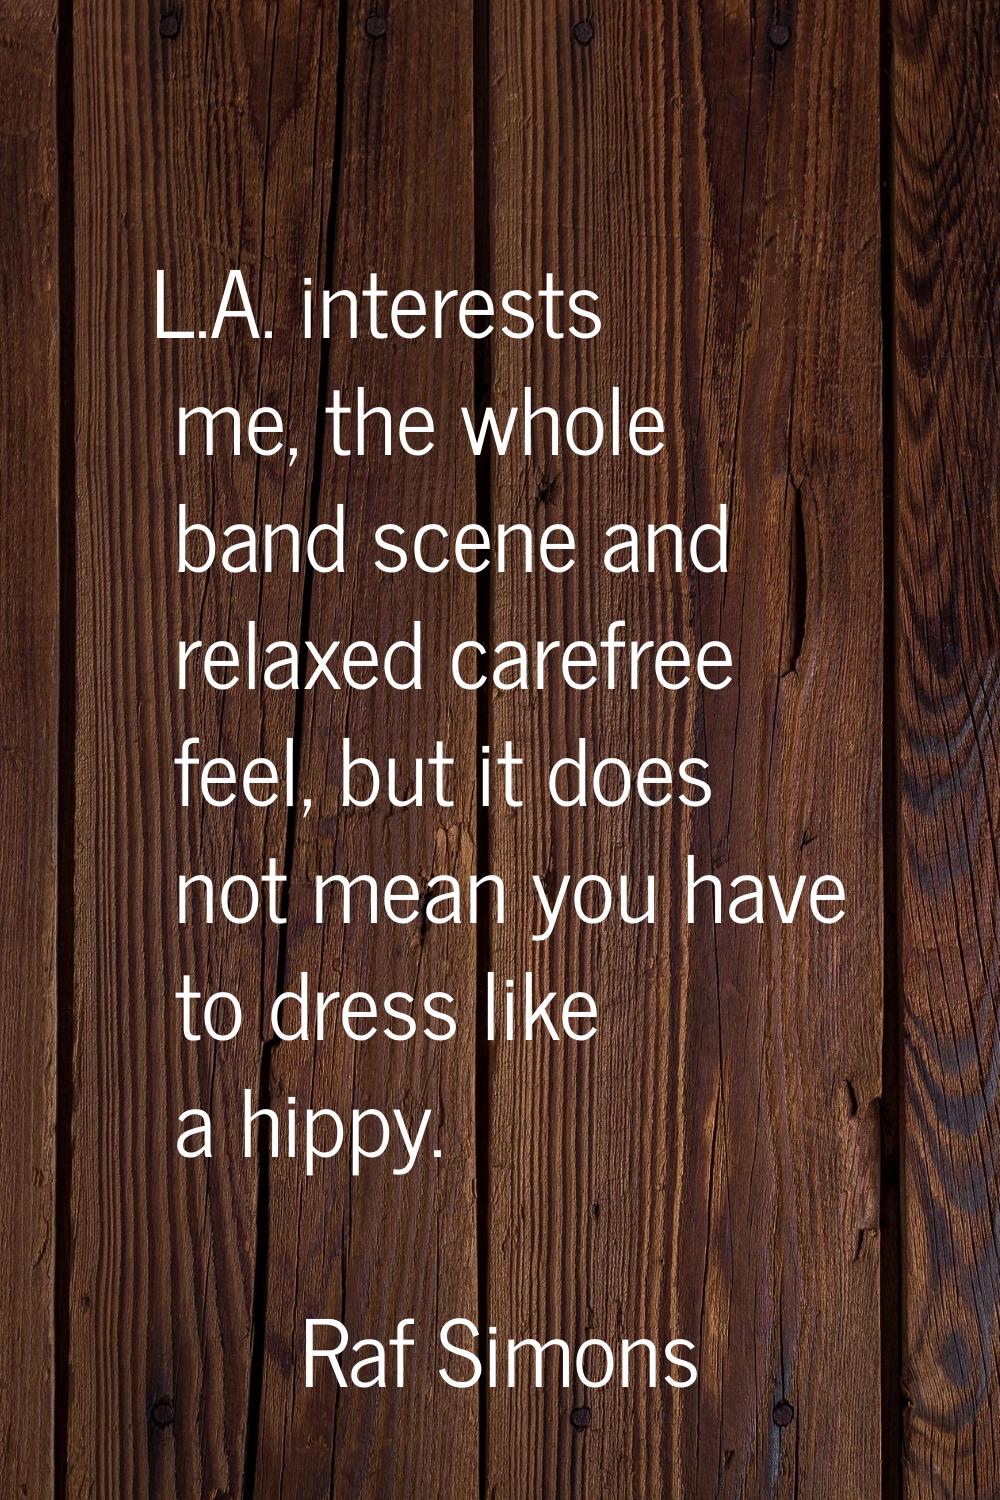 L.A. interests me, the whole band scene and relaxed carefree feel, but it does not mean you have to